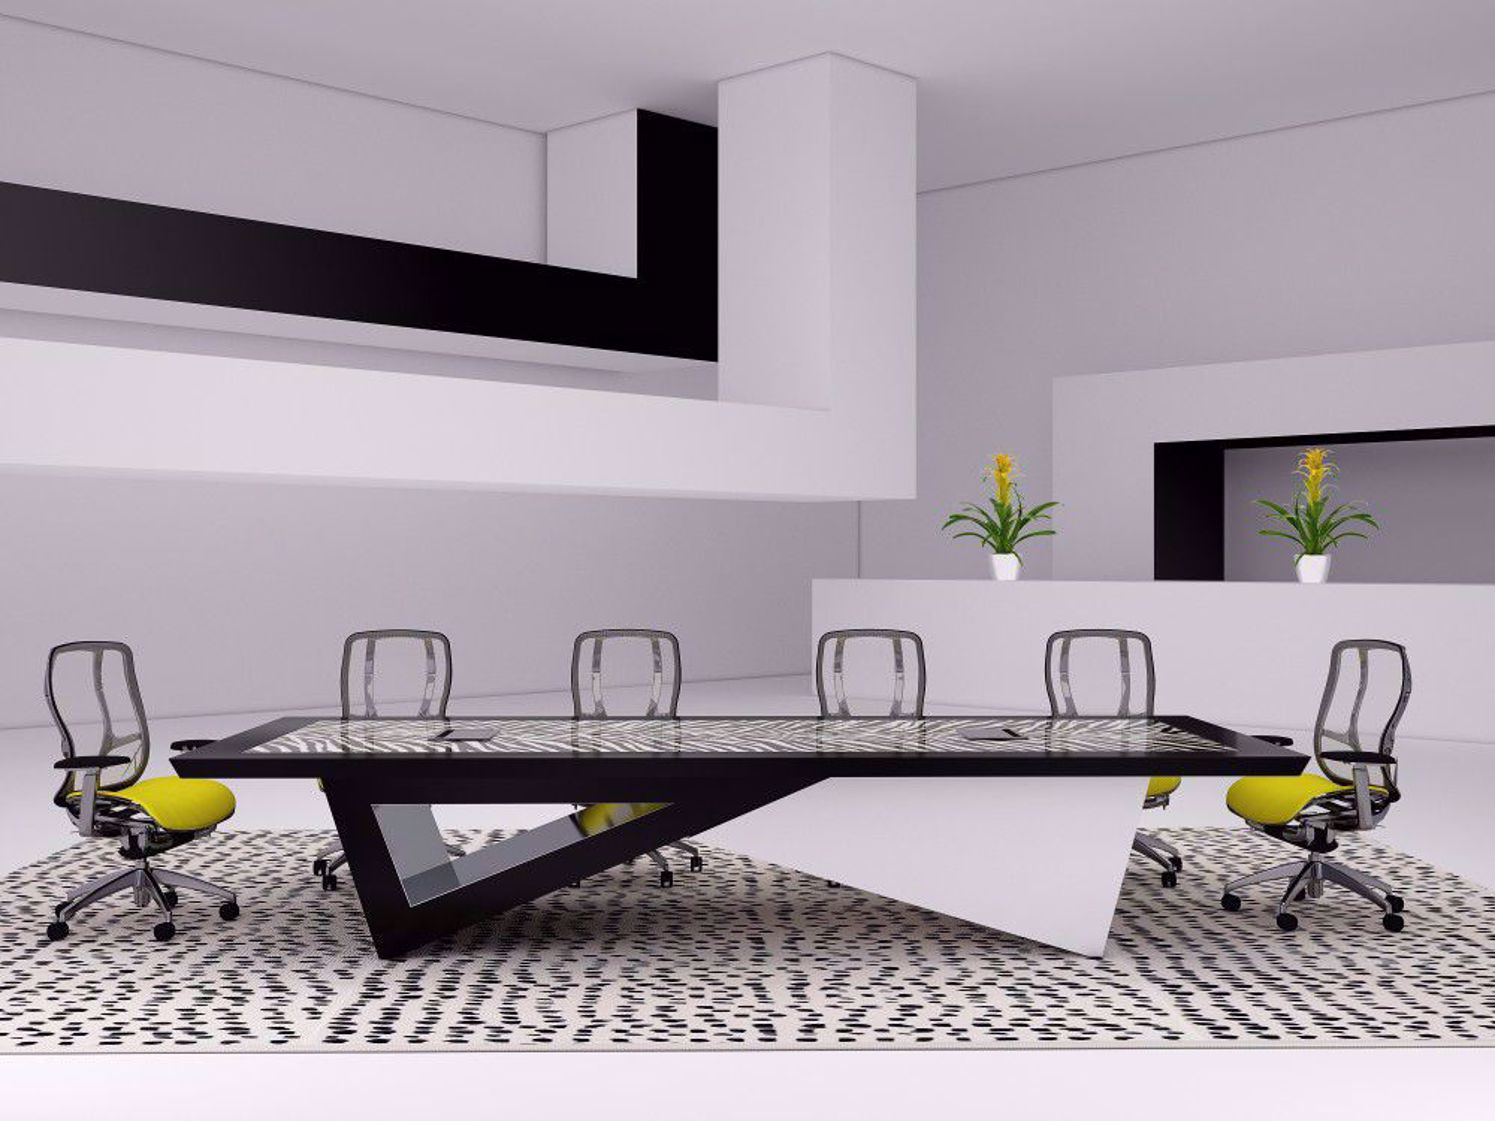 Modern Office Furniture: Purely Functional, or Creative Work of Art?